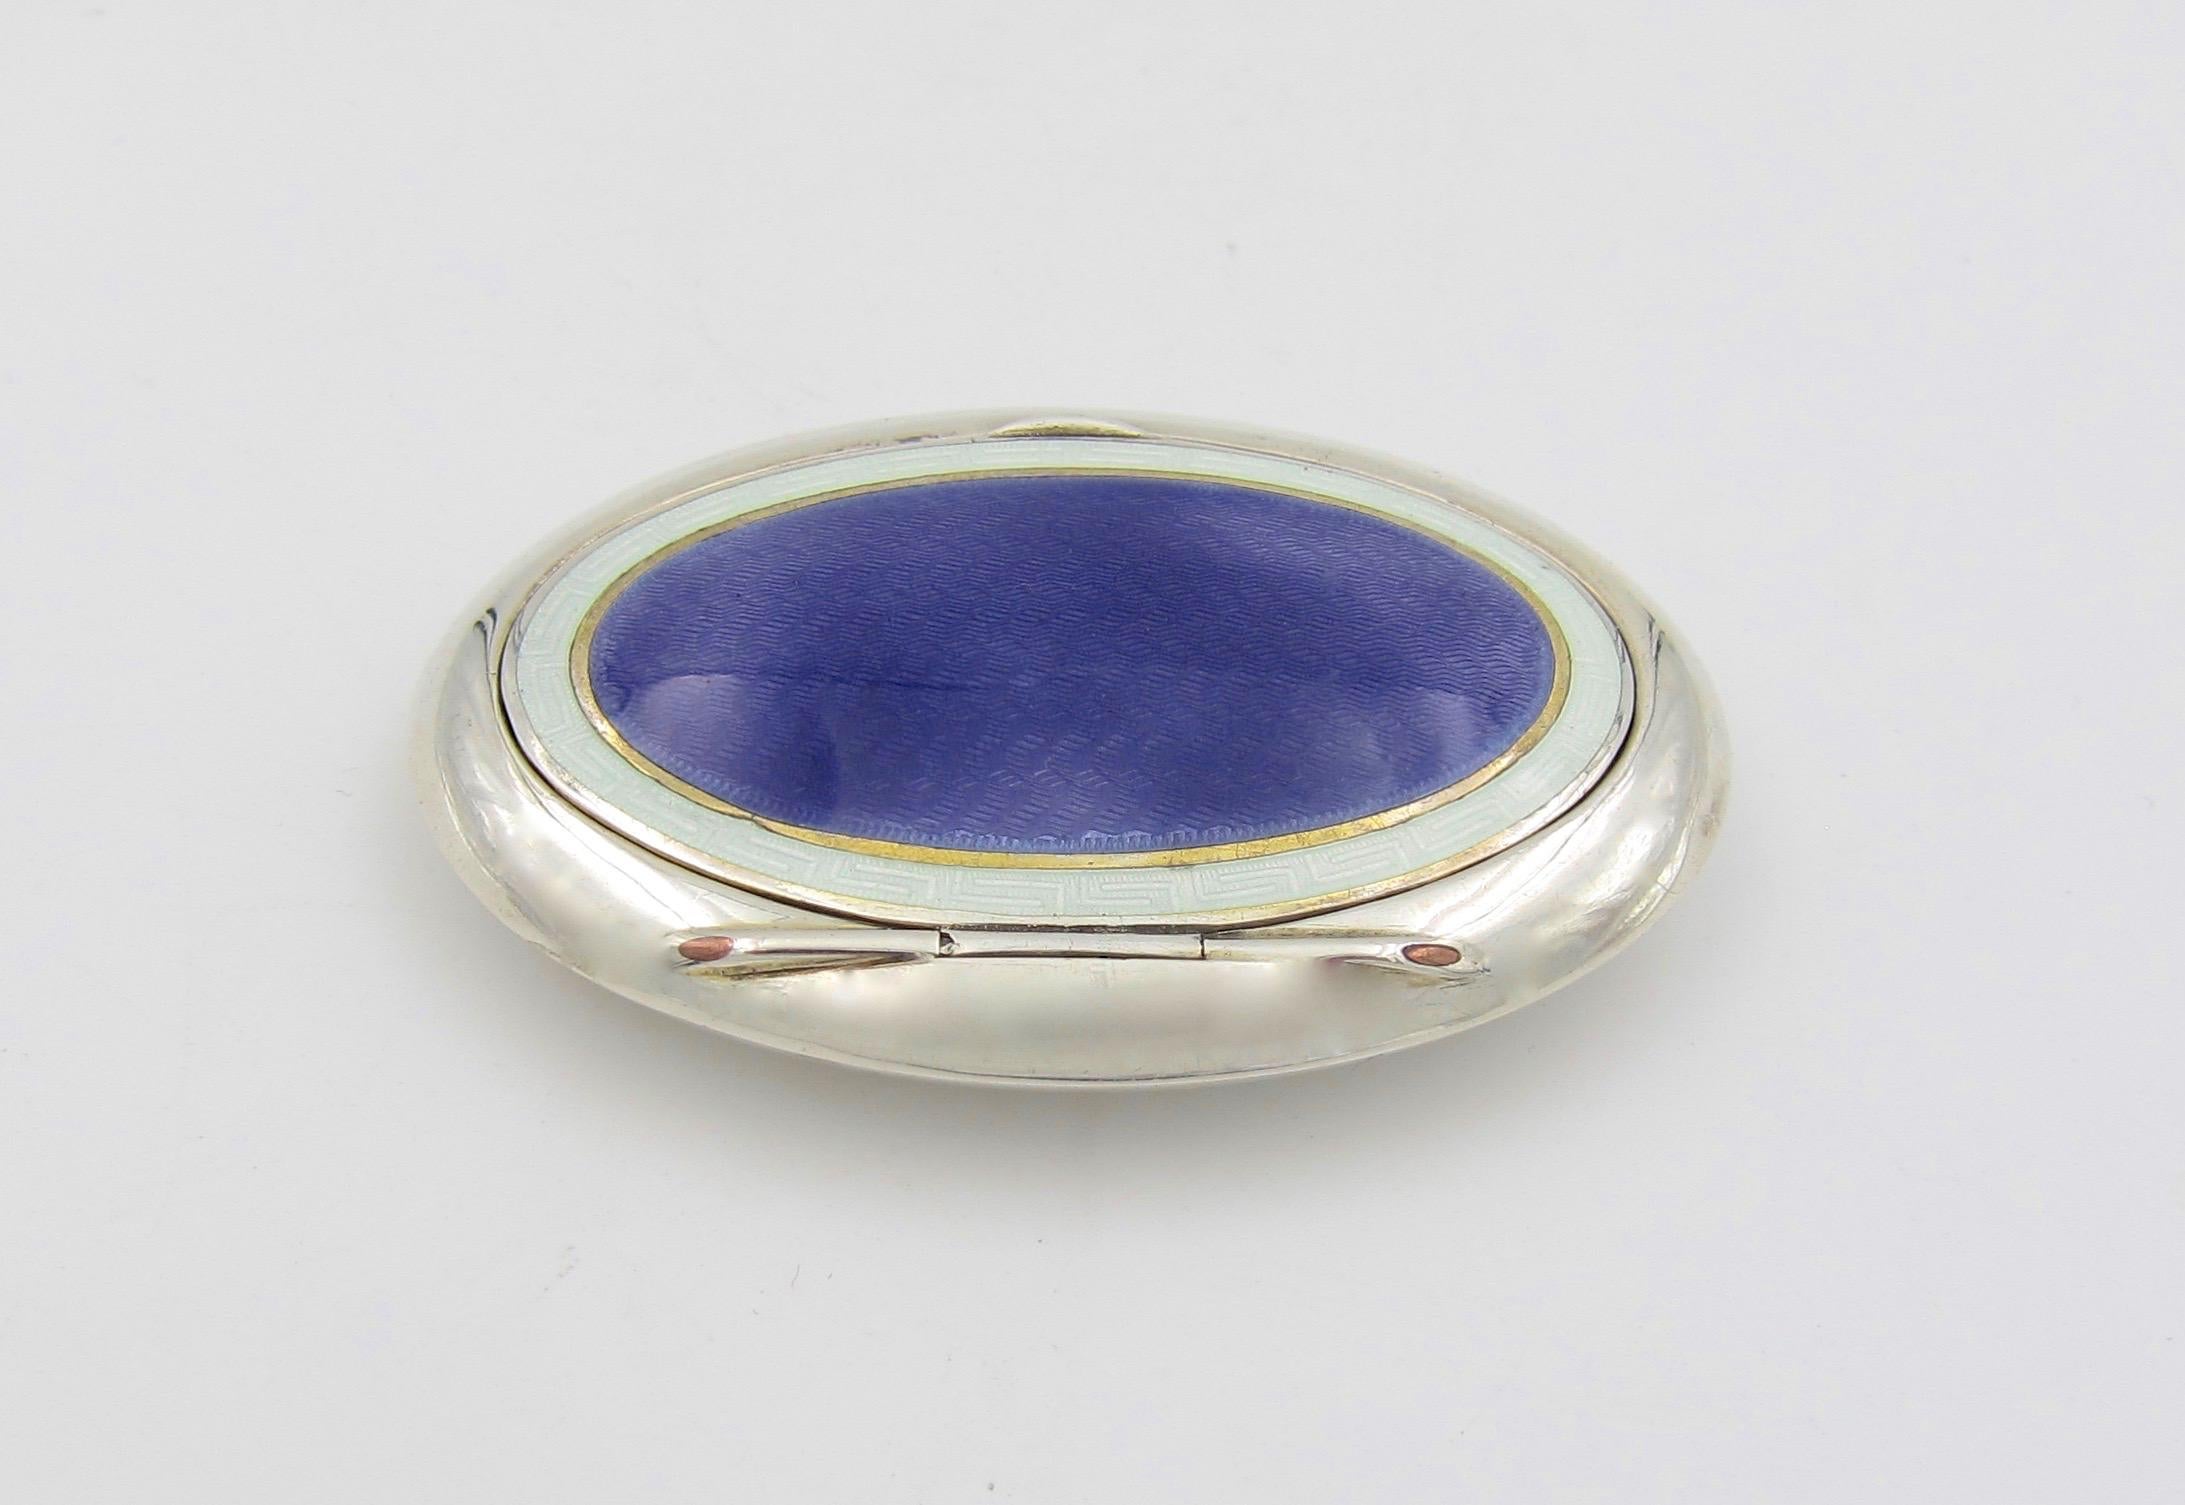 Enameled Sterling Silver and Enamel Oval Box by Charles Edwin Turner, Birmingham, 1910